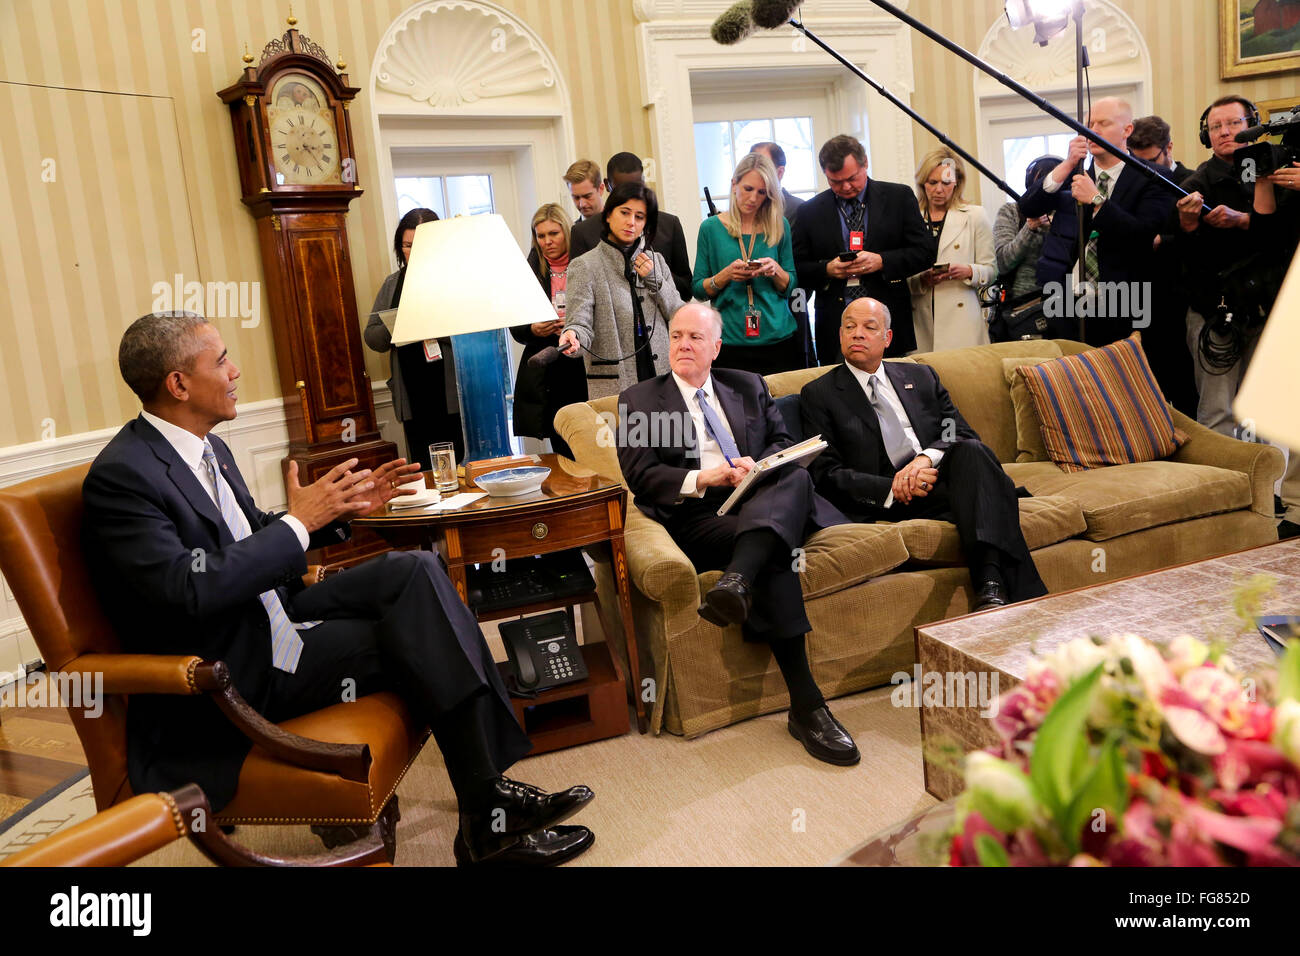 United States President Barack Obama meets with former National Security Advisor Tom Donilon (C) and former IBM CEO Sam Palmisano (unseen), who are being appointed as the Chair and Vice Chair respectively of the Commission on Enhancing National Cybersecurity in the Oval Office of the White House, in Washington, DC, February 17, 2016. Also present during this meeting are Commerce Secretary Penny Pritzker (unseen) and Secretary of Homeland Security Jeh Johnson (R). Credit: Aude Guerrucci/Pool via CNP - NO WIRE SERVICE - Stock Photo